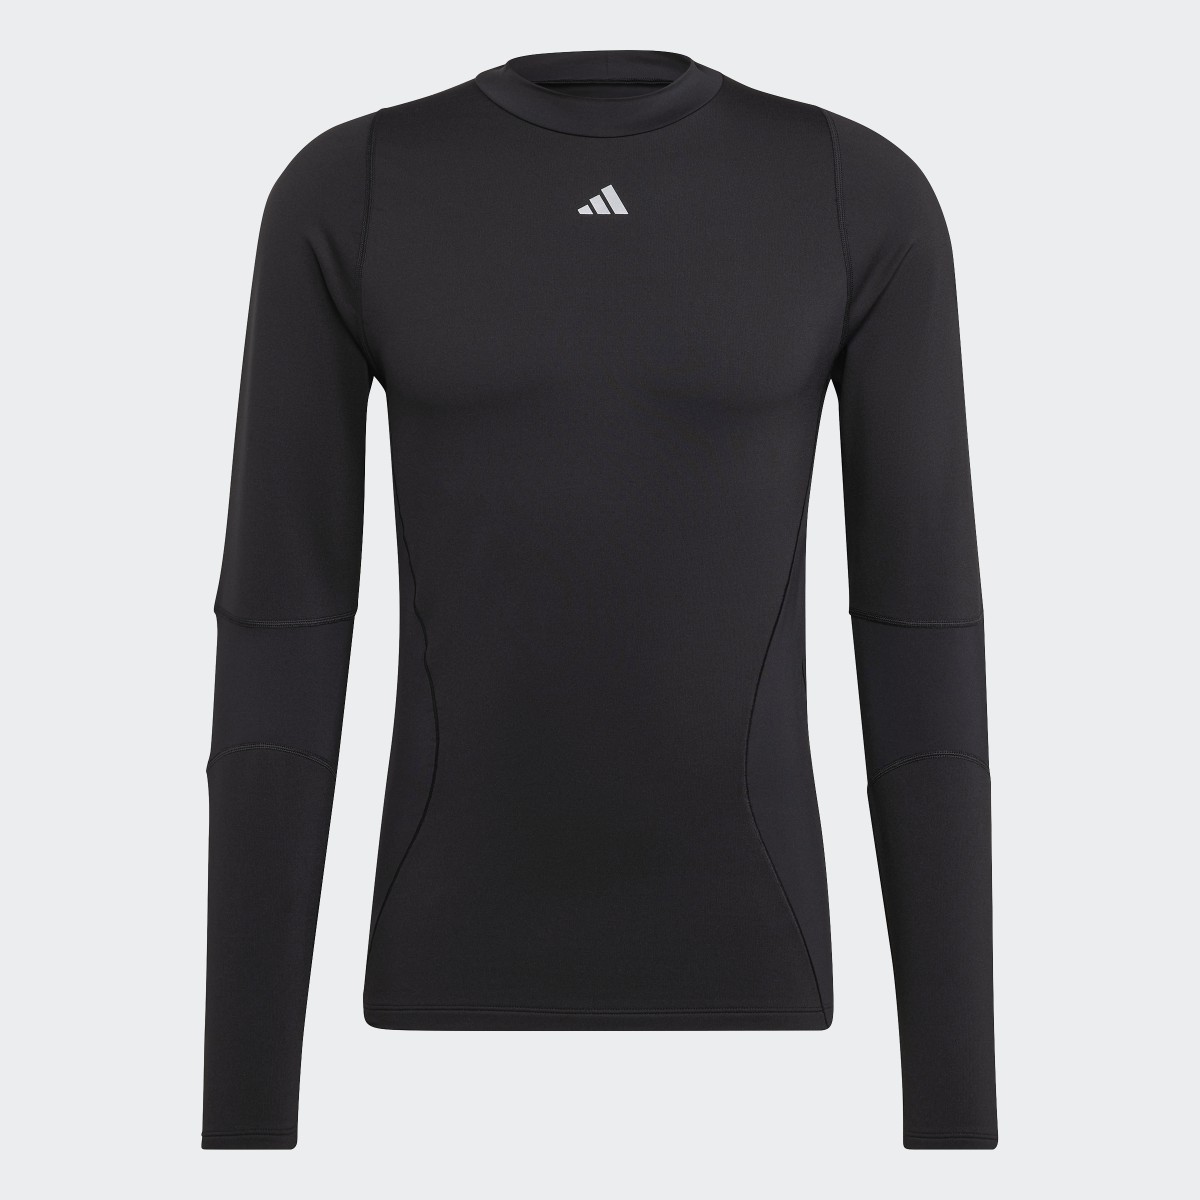 Adidas Techfit COLD.RDY Training Long-Sleeve Top. 5